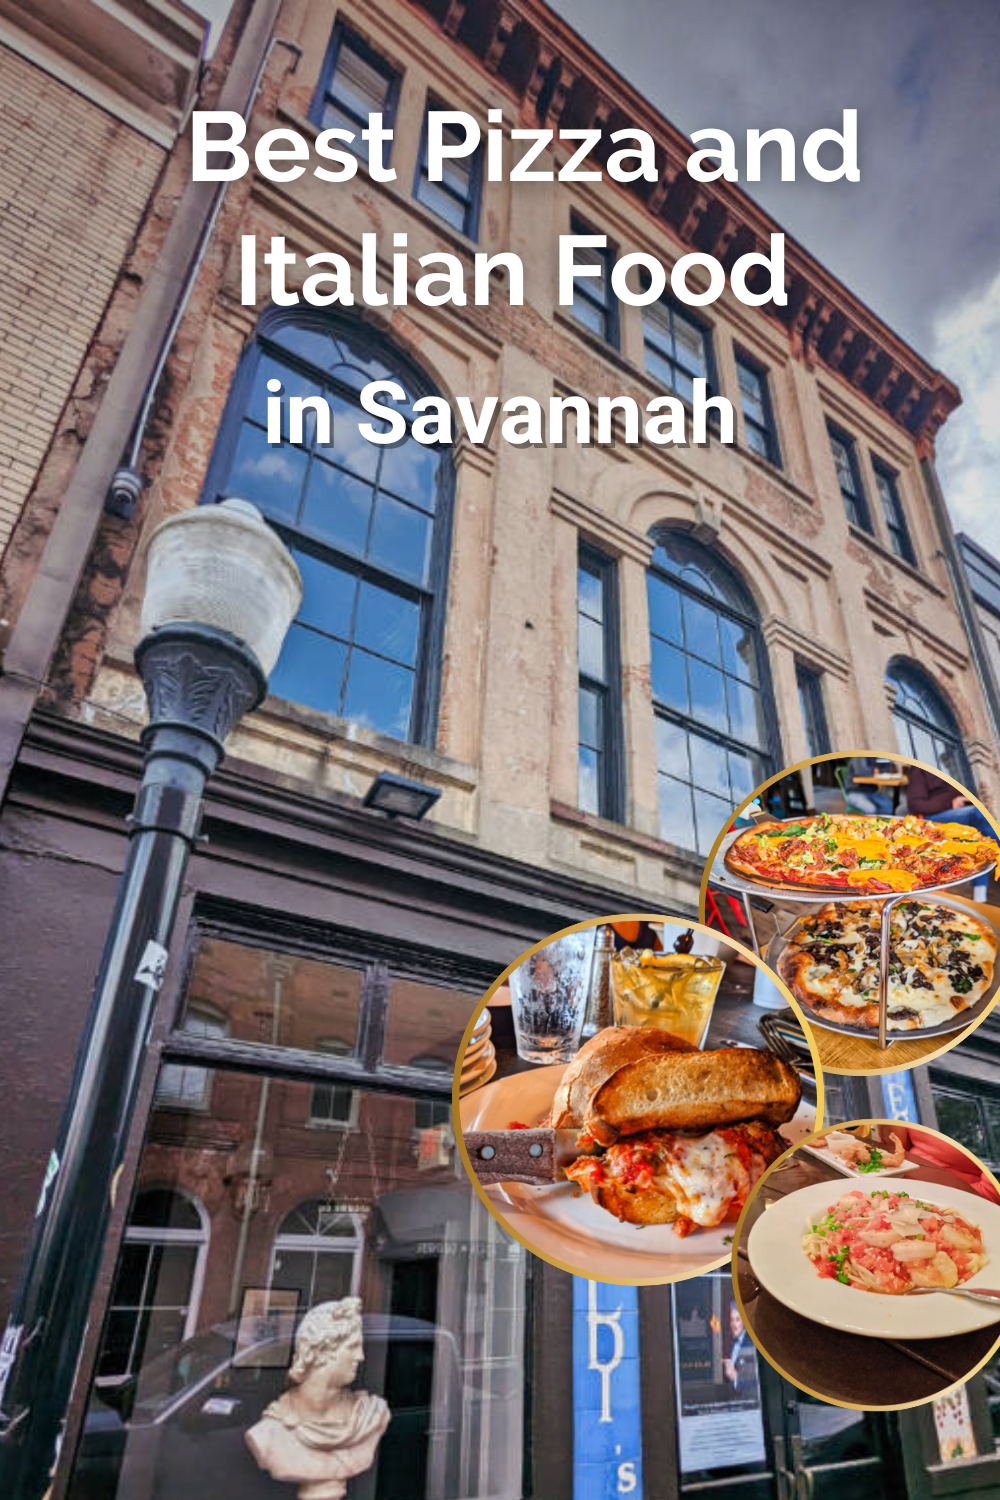 There are a shocking number of Italian restaurants in Savannah. We've picked our favorites, and yes, there are a lot of Neapolitan style pizza spots, but you'll love each of these delicious choices.